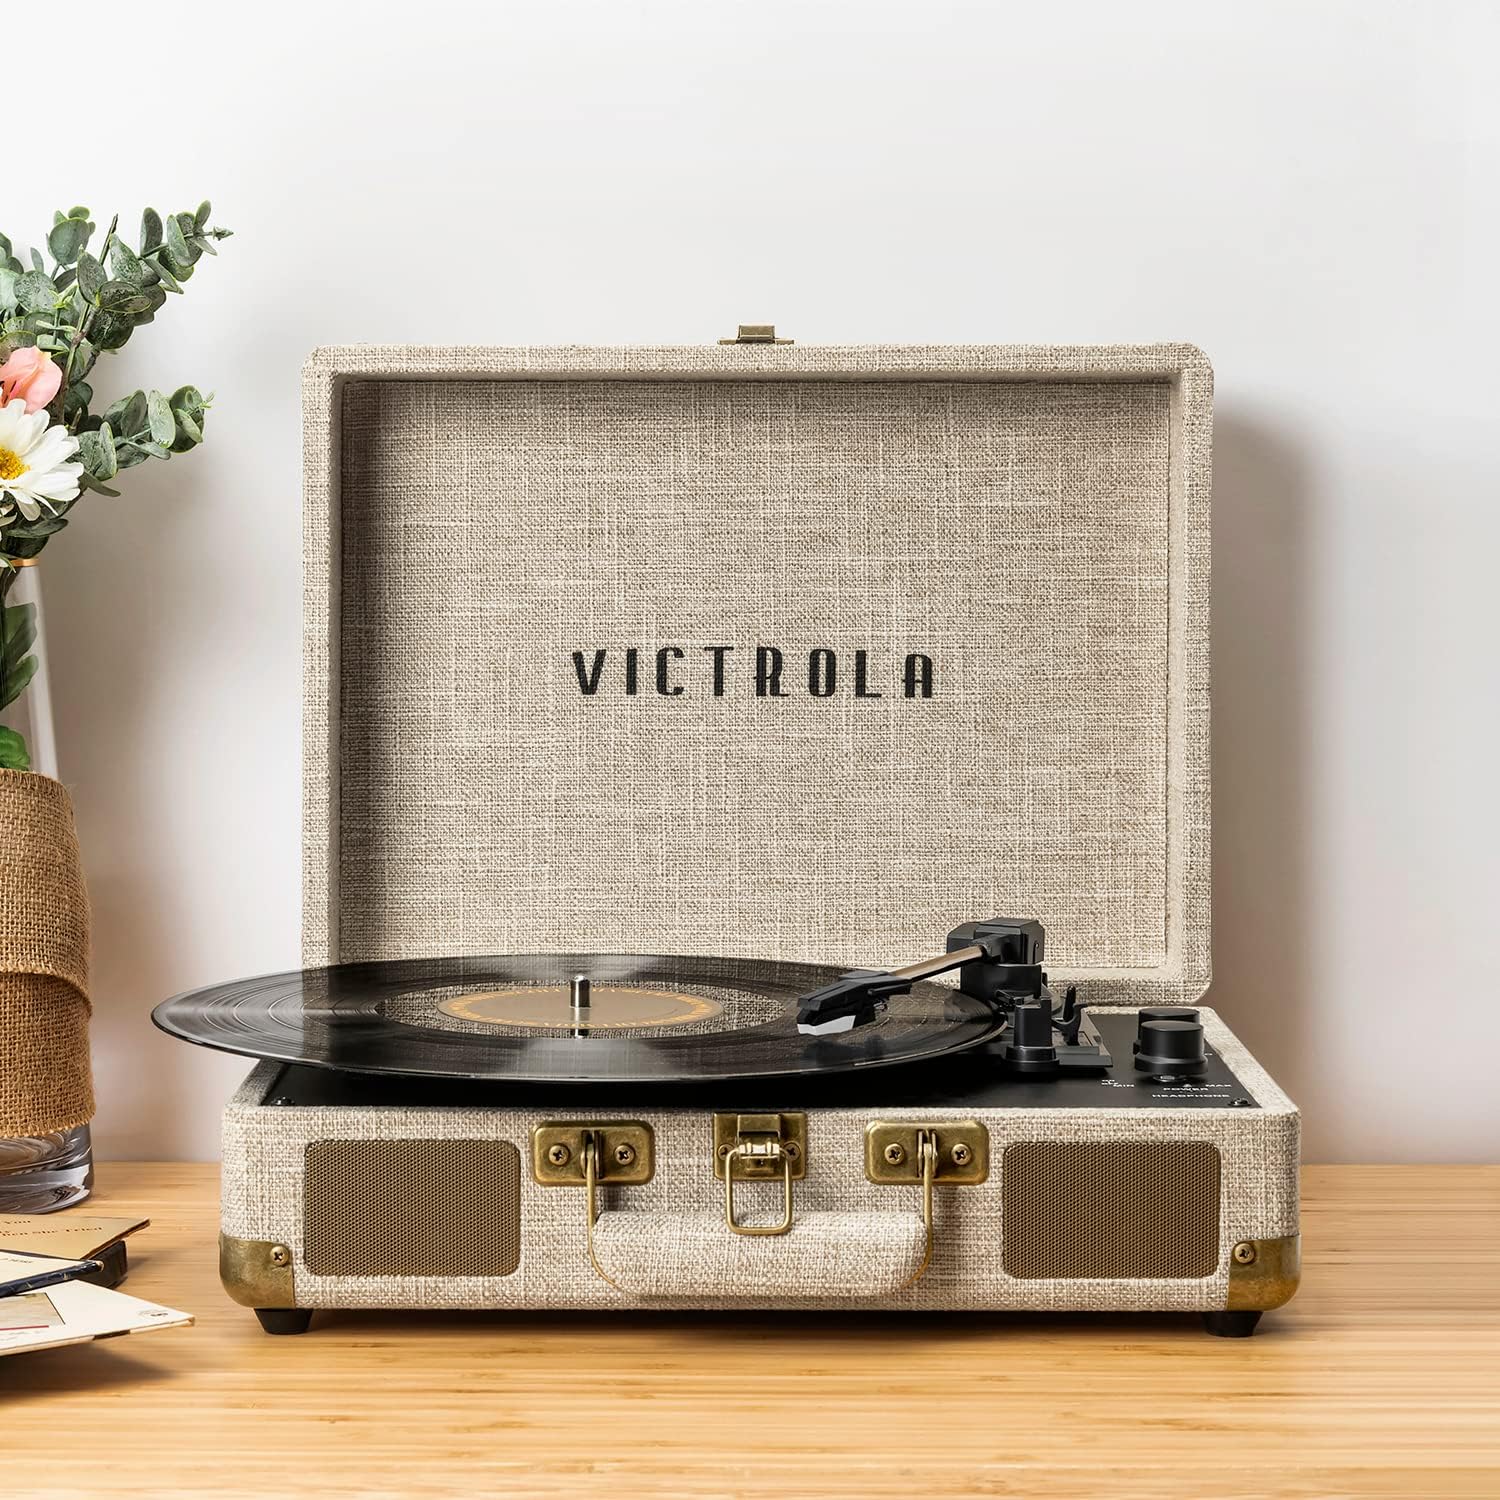 Victrola Vintage 3-Speed Bluetooth Portable Suitcase Record Player with Built-in Speakers | Upgraded Turntable Audio Sound| Includes Extra Stylus | Turquoise, Prototype Number: VSC-550BT